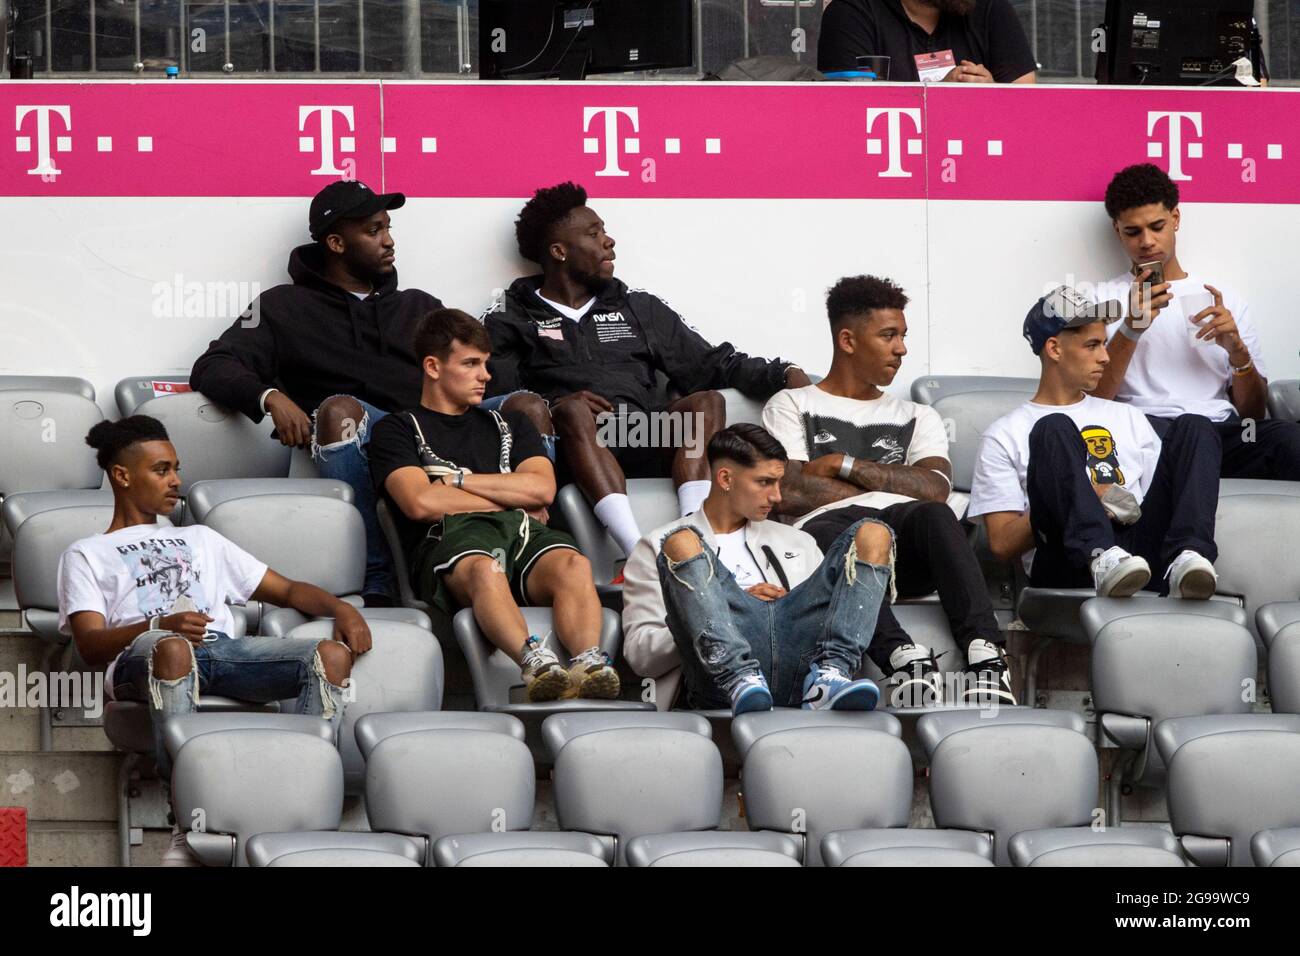 Muenchen, ALLIANZARENA, Germany. 24th July, 2021. Alphonso DAVIES (M, above withte) and appendix. Soccer, FC Bayern Munich (M) - Ajax Amsterdam (AMS) 2: 2, preparatory game for the 2021-2022 season, on July 24th, 2021 in Muenchen, ALLIANZARENA, Germany. ¬ Credit: dpa/Alamy Live News Stock Photo